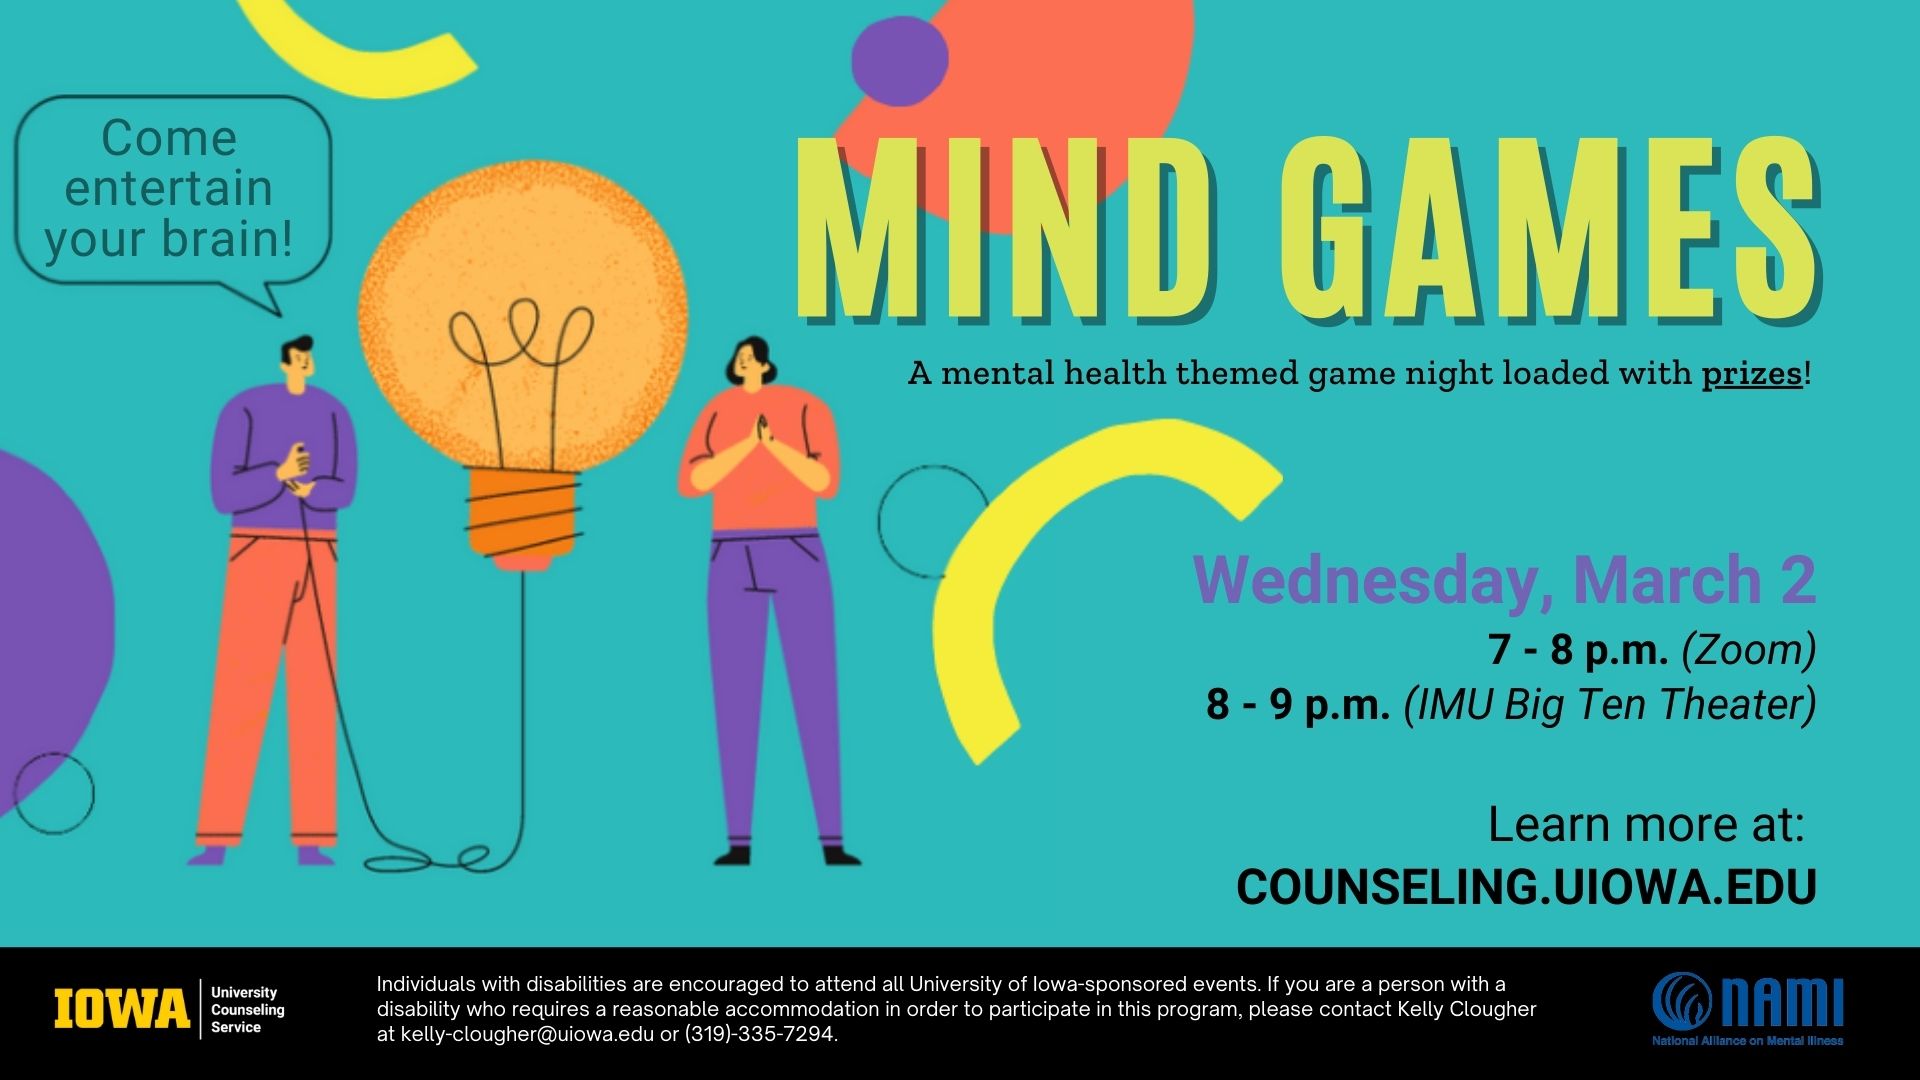 Mind games a mental health themed game night loaded with prizes! Wednesday, March 2nd 7-8pm Zoom, 8-9pm IMUY Big Ten Theatre. Learn more at Counseling.iowa.edu.